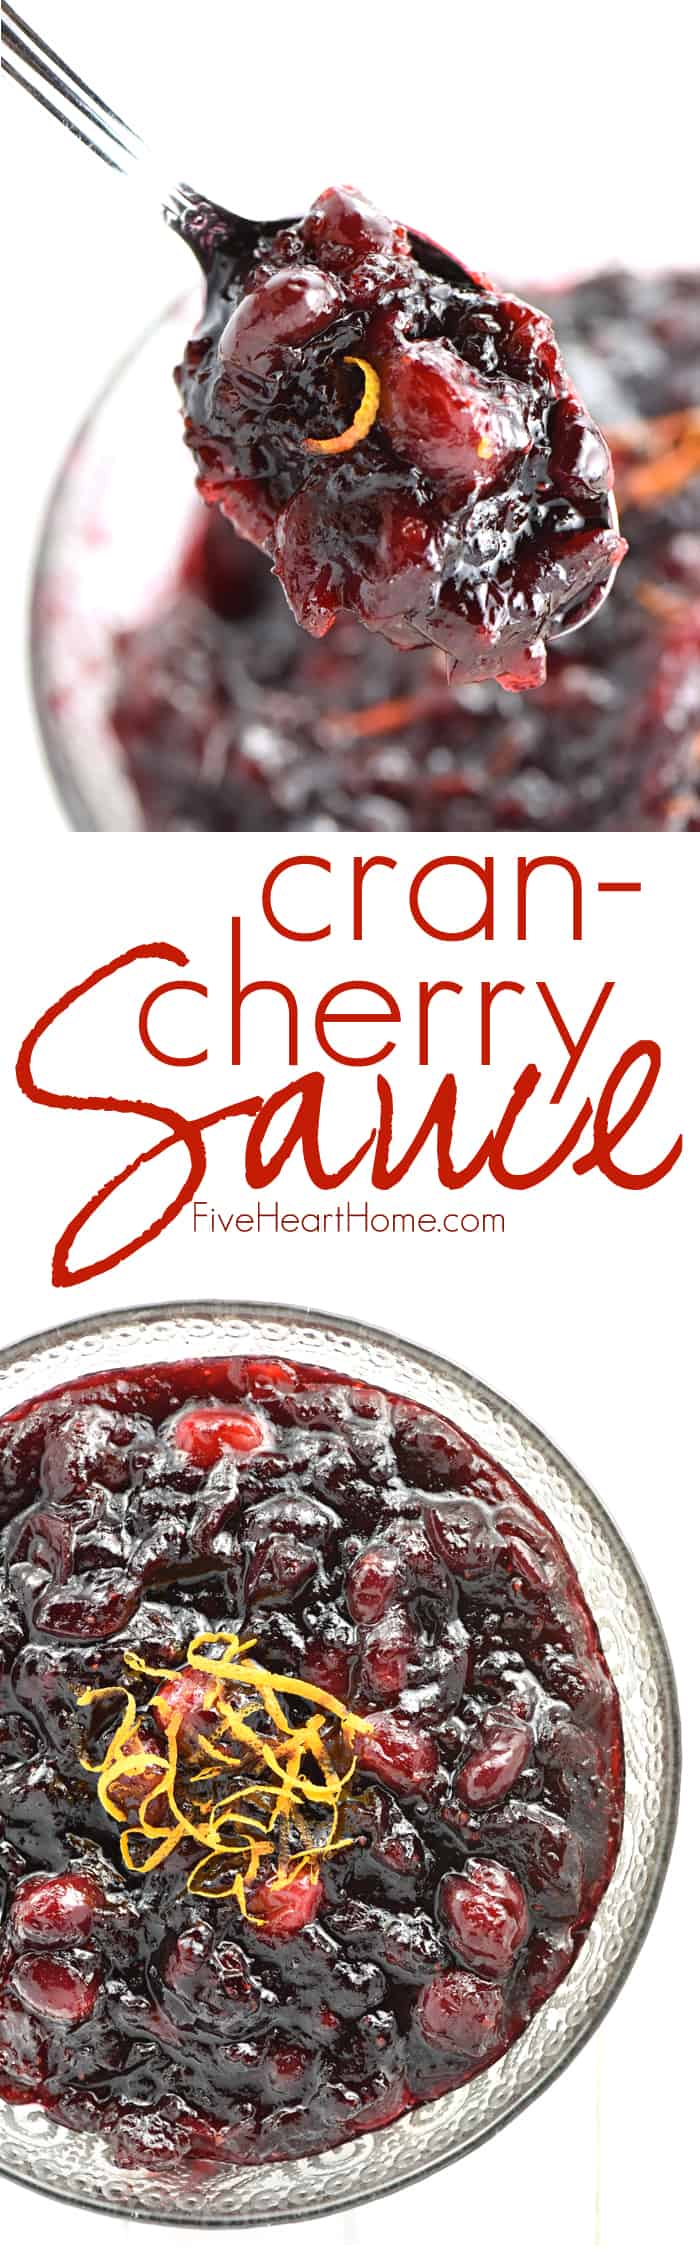 Sweetened with honey and brightened with citrus, Cran-Cherry Sauce strikes a perfect balance between tart cranberries and luscious cherry preserves, making it the perfect addition to your Thanksgiving table! via @fivehearthome